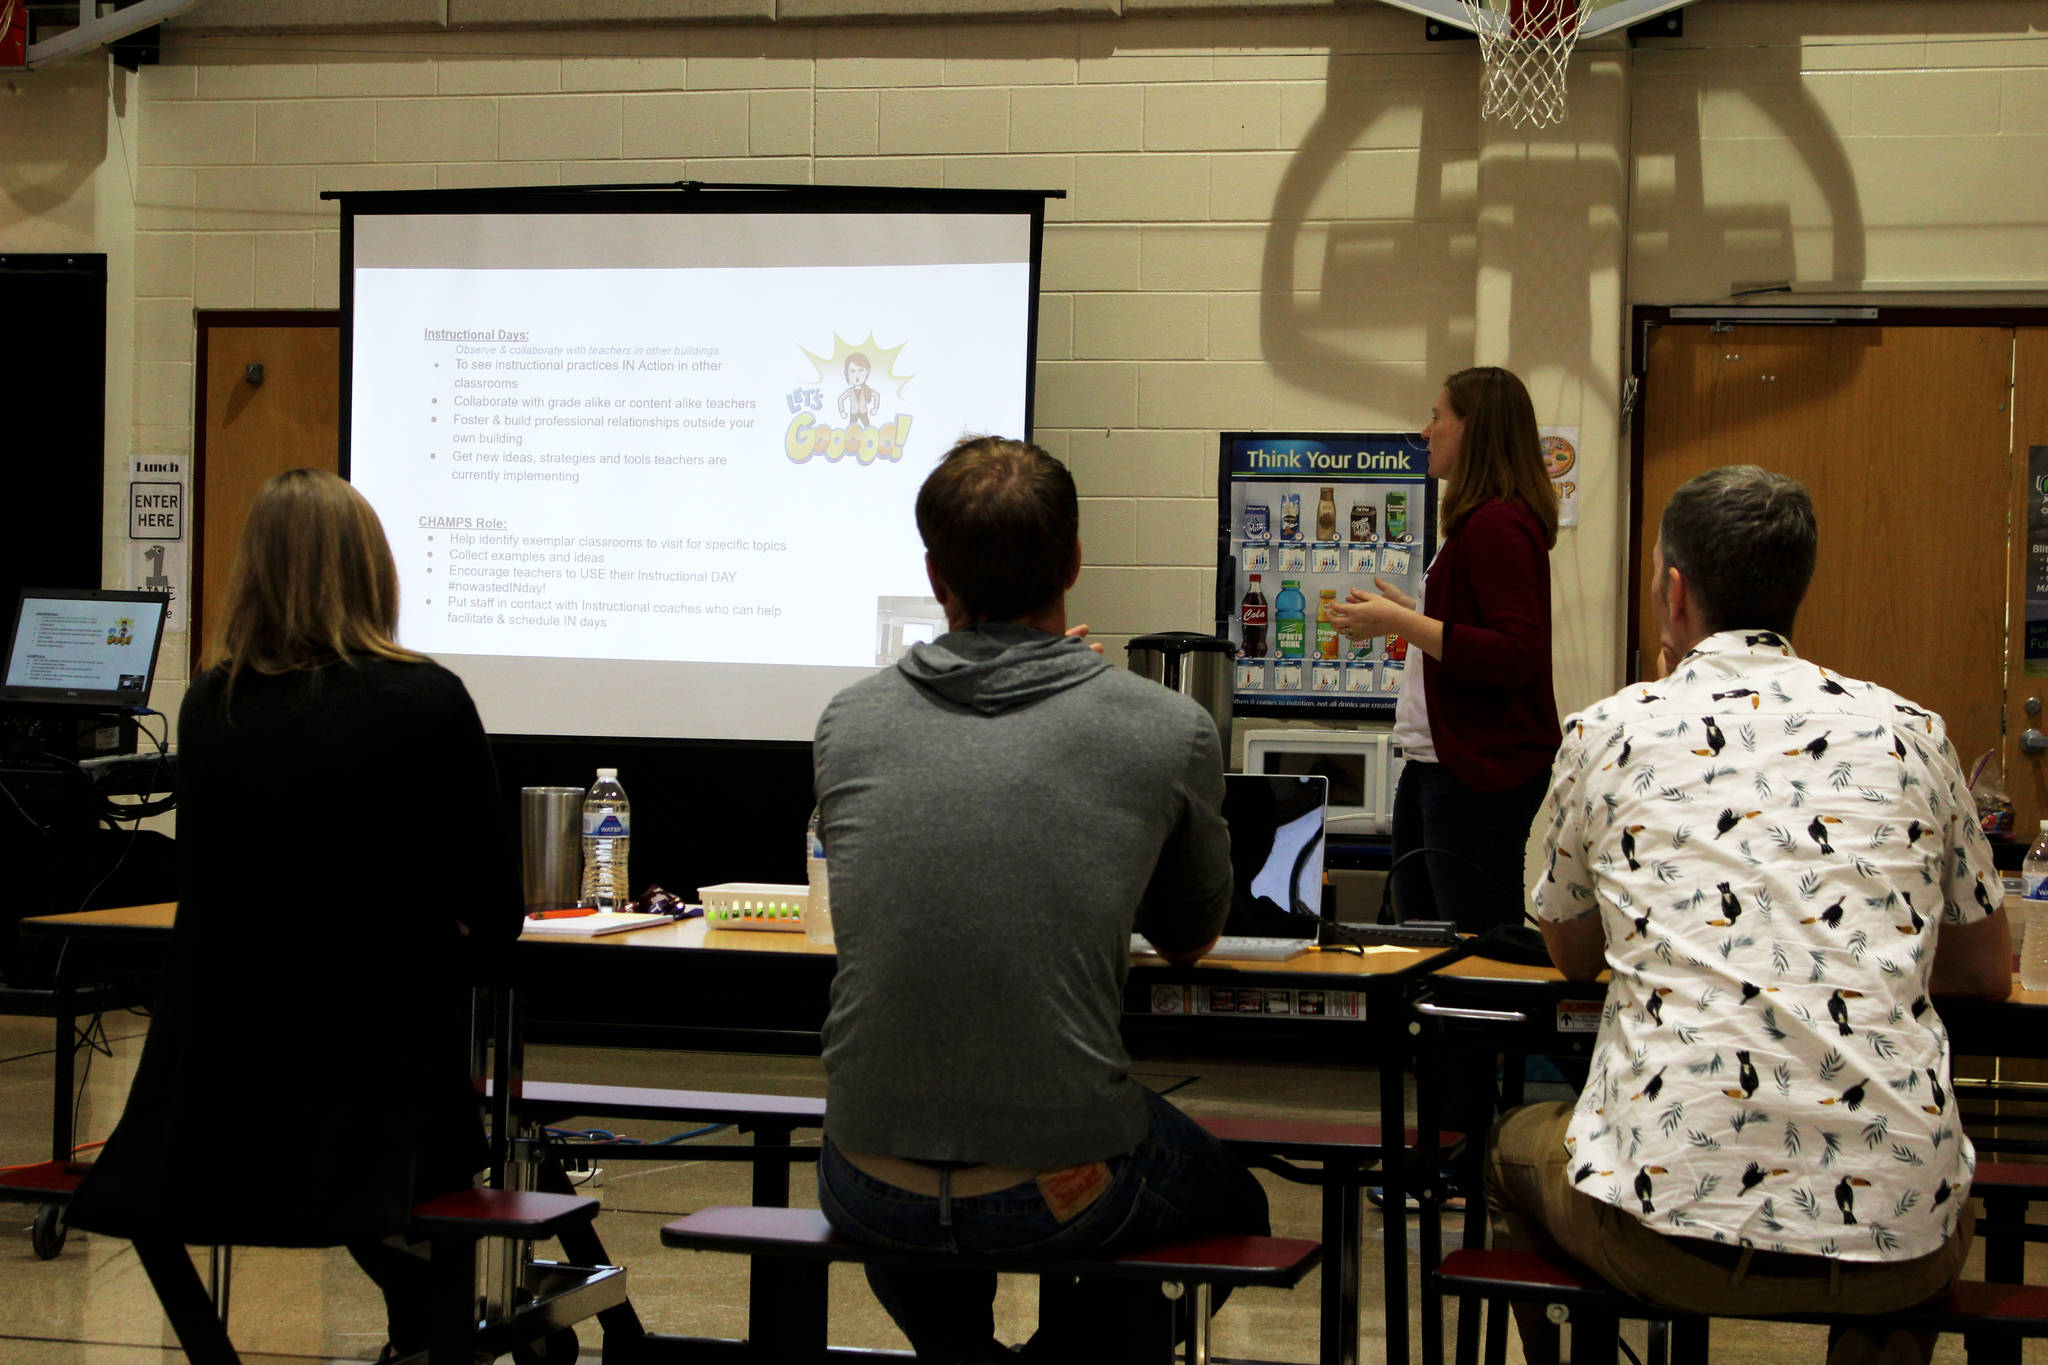 Annaleah Karron leads a session during an in-service at Skyview Middle School on Friday, Aug. 13, 2021 in Soldotna, Alaska. (Ashlyn O’Hara/Peninsula Clarion)